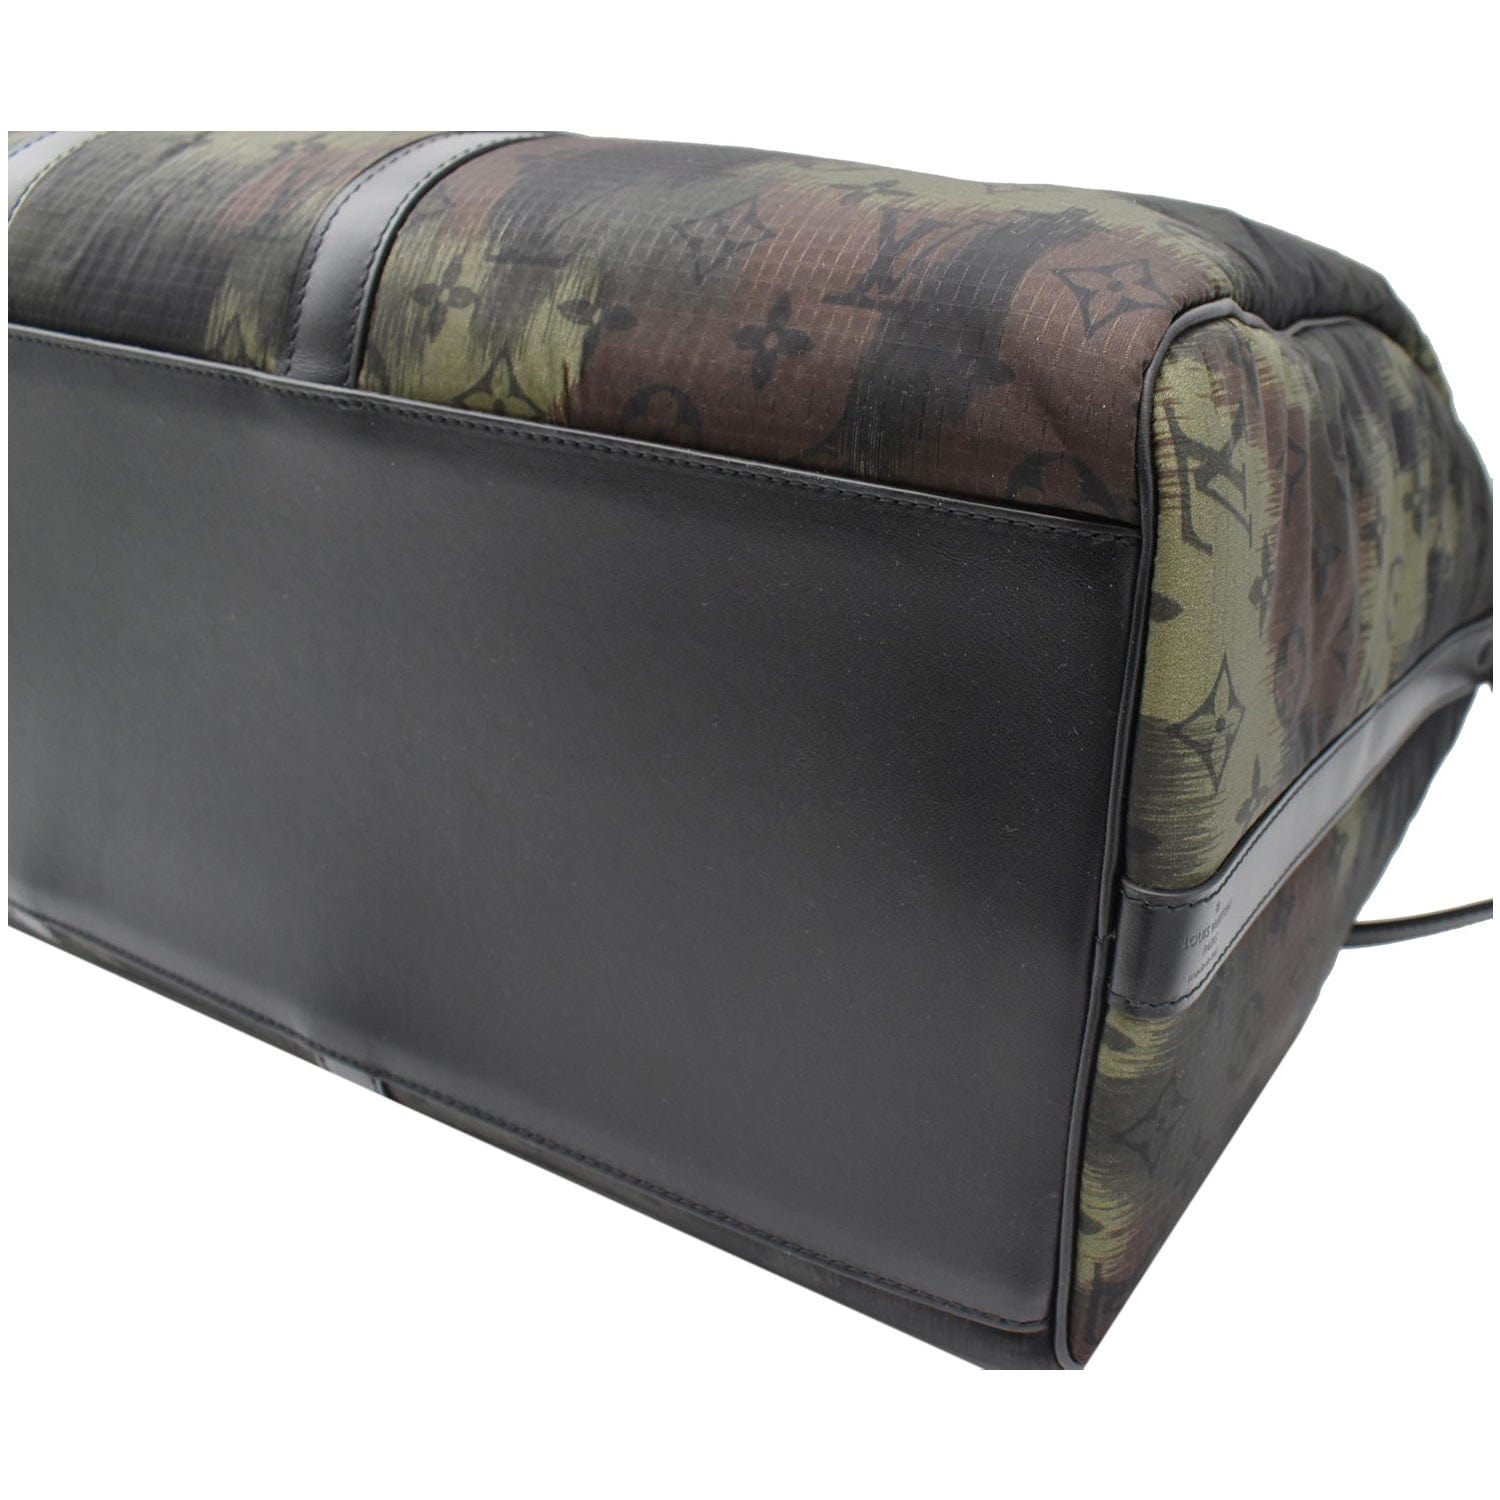 Louis Vuitton Monogram Camouflage Keepall Bandouliere 50 - Green Luggage  and Travel, Handbags - LOU806820